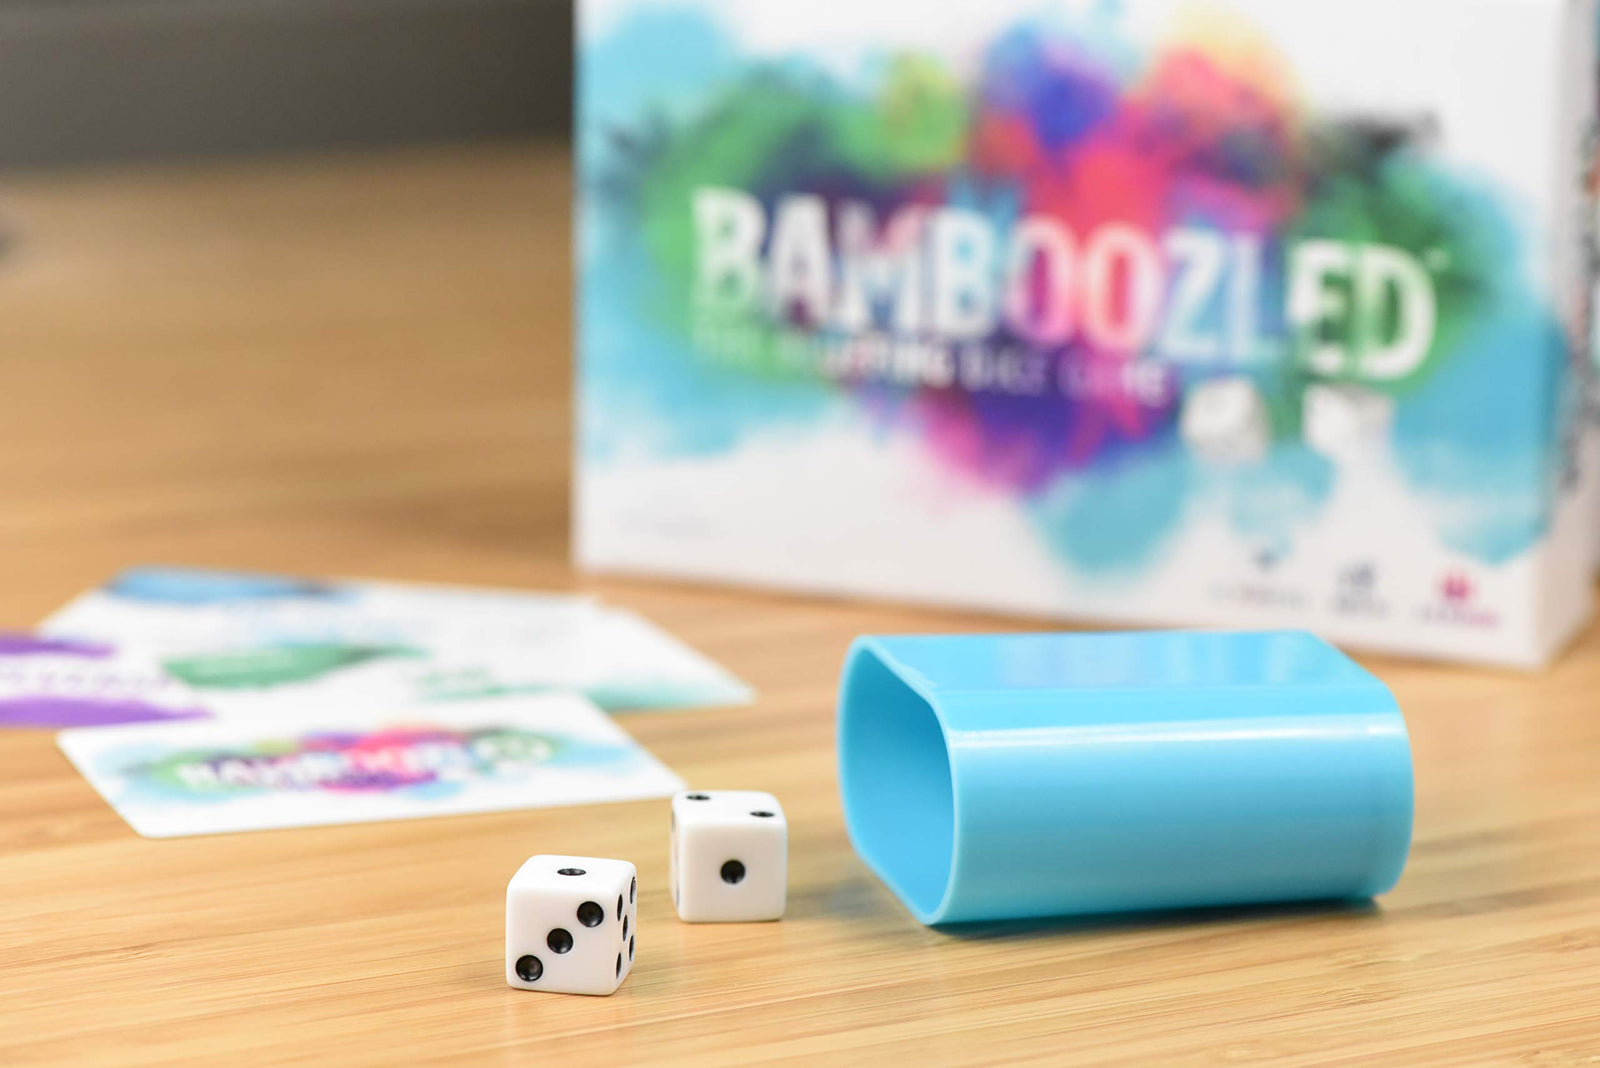 Bamboozled - The Bluffing Dice Game